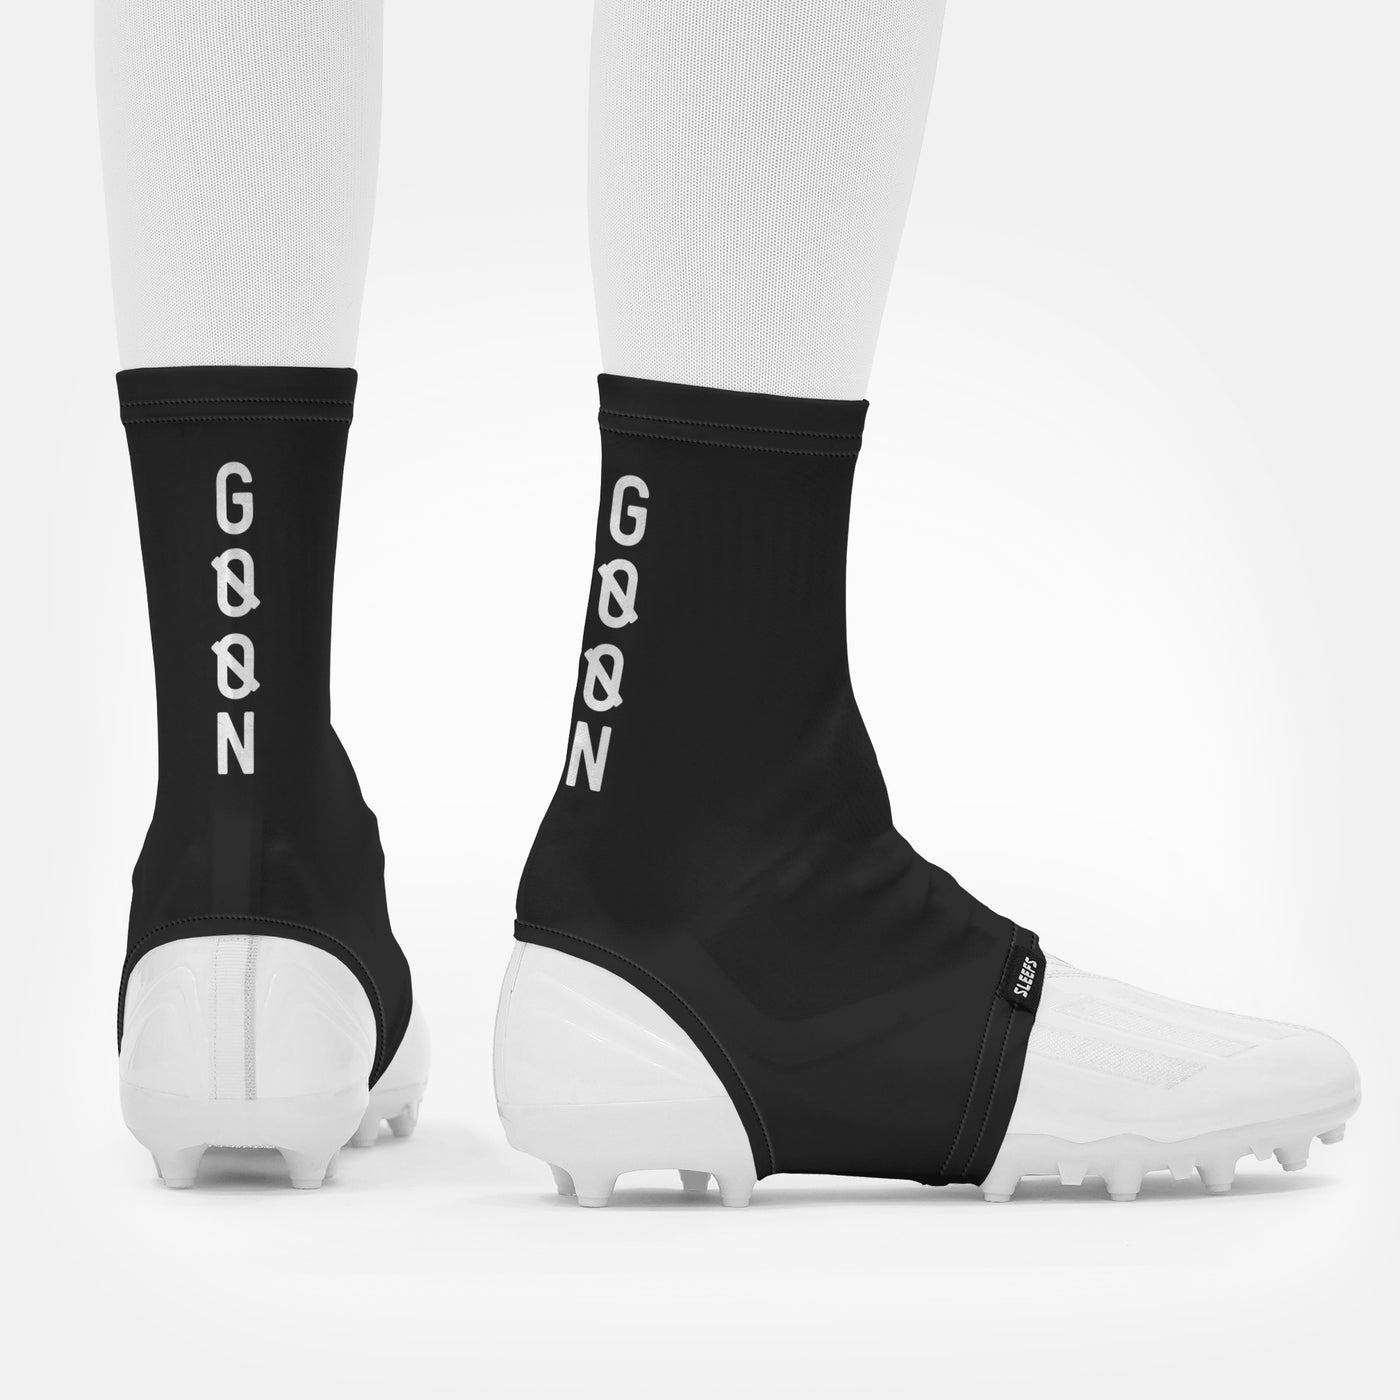 Goon Spats / Cleat Covers